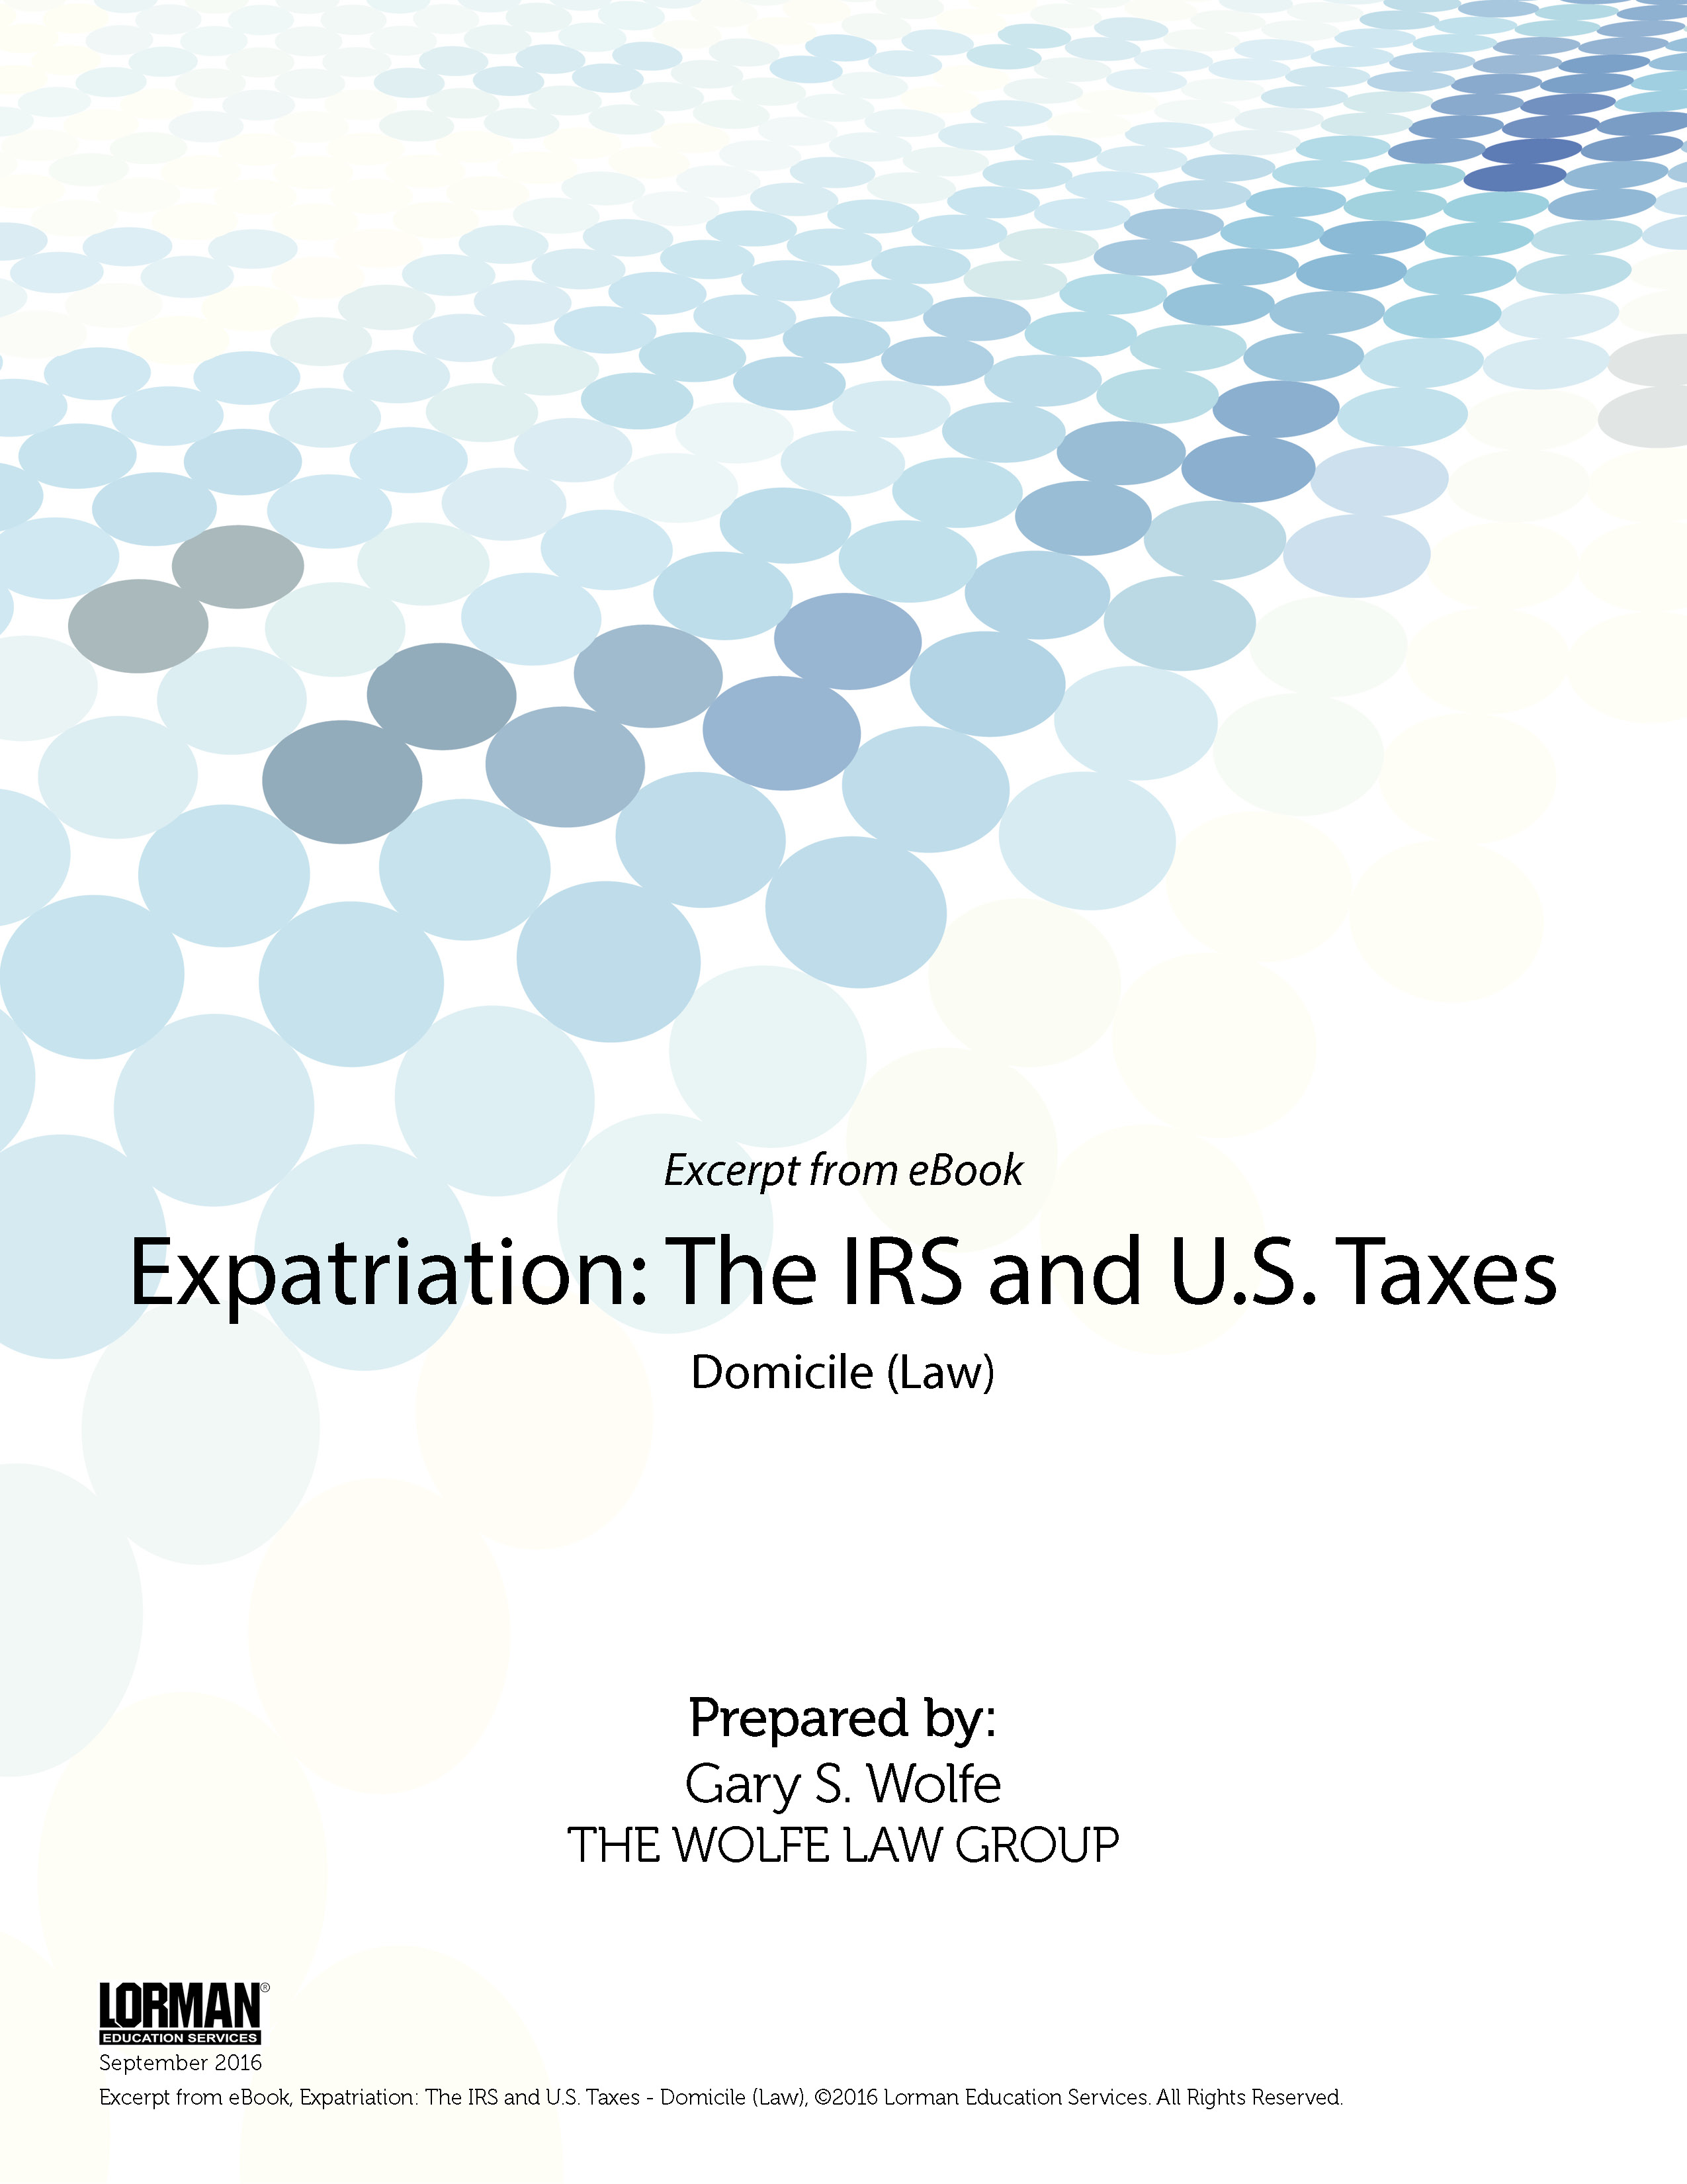 Expatriation - The IRS and U.S. Taxes - Domicile (Law)